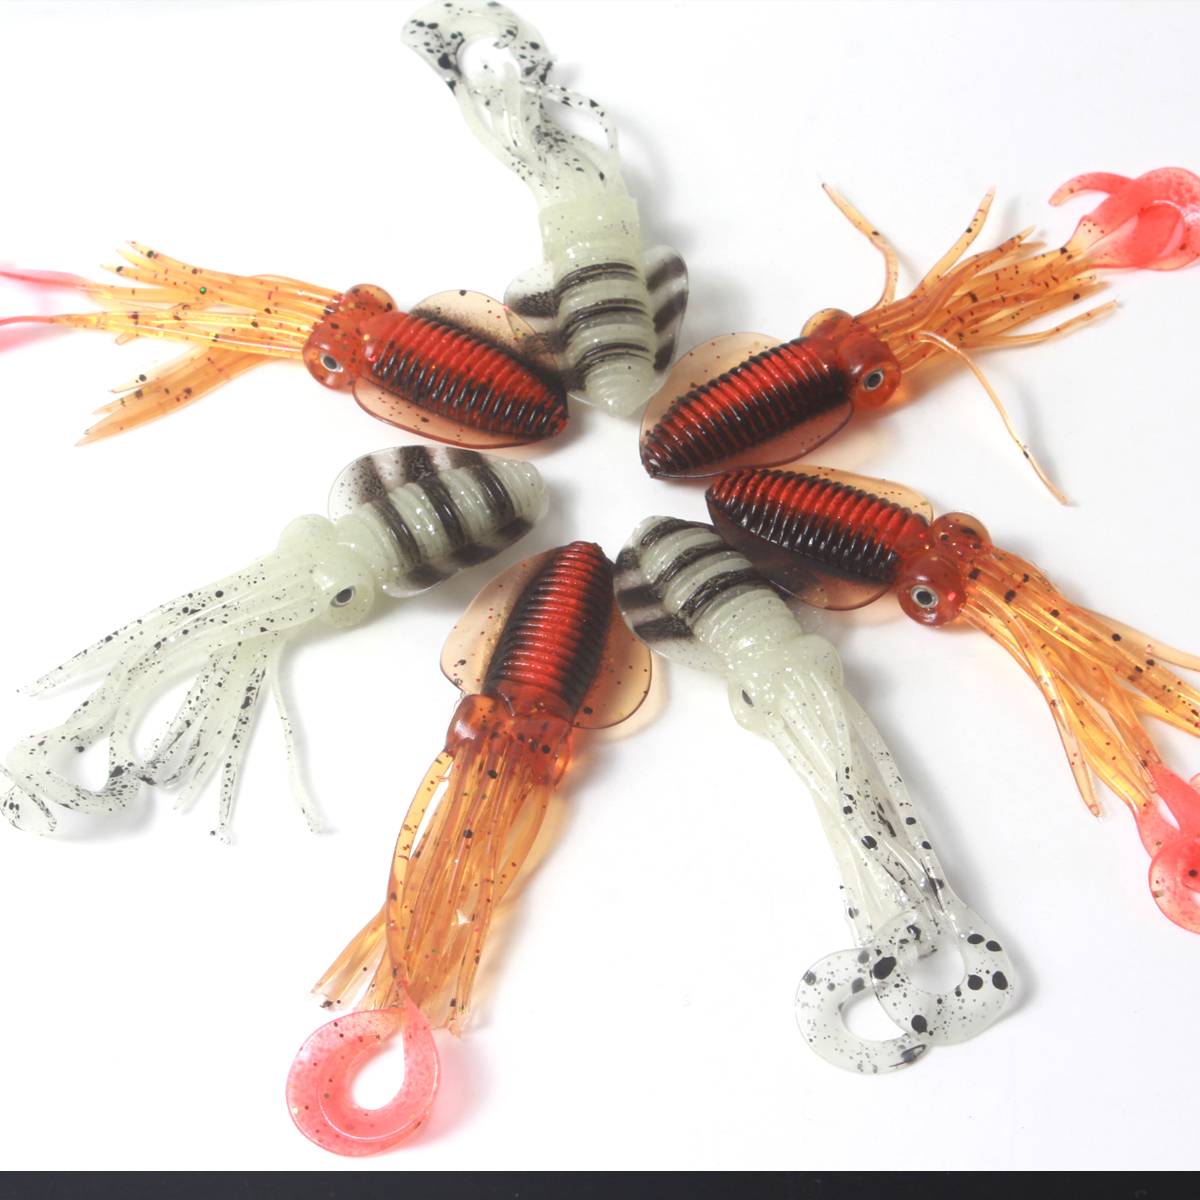 Colorful soft octpus skirt fishing lure